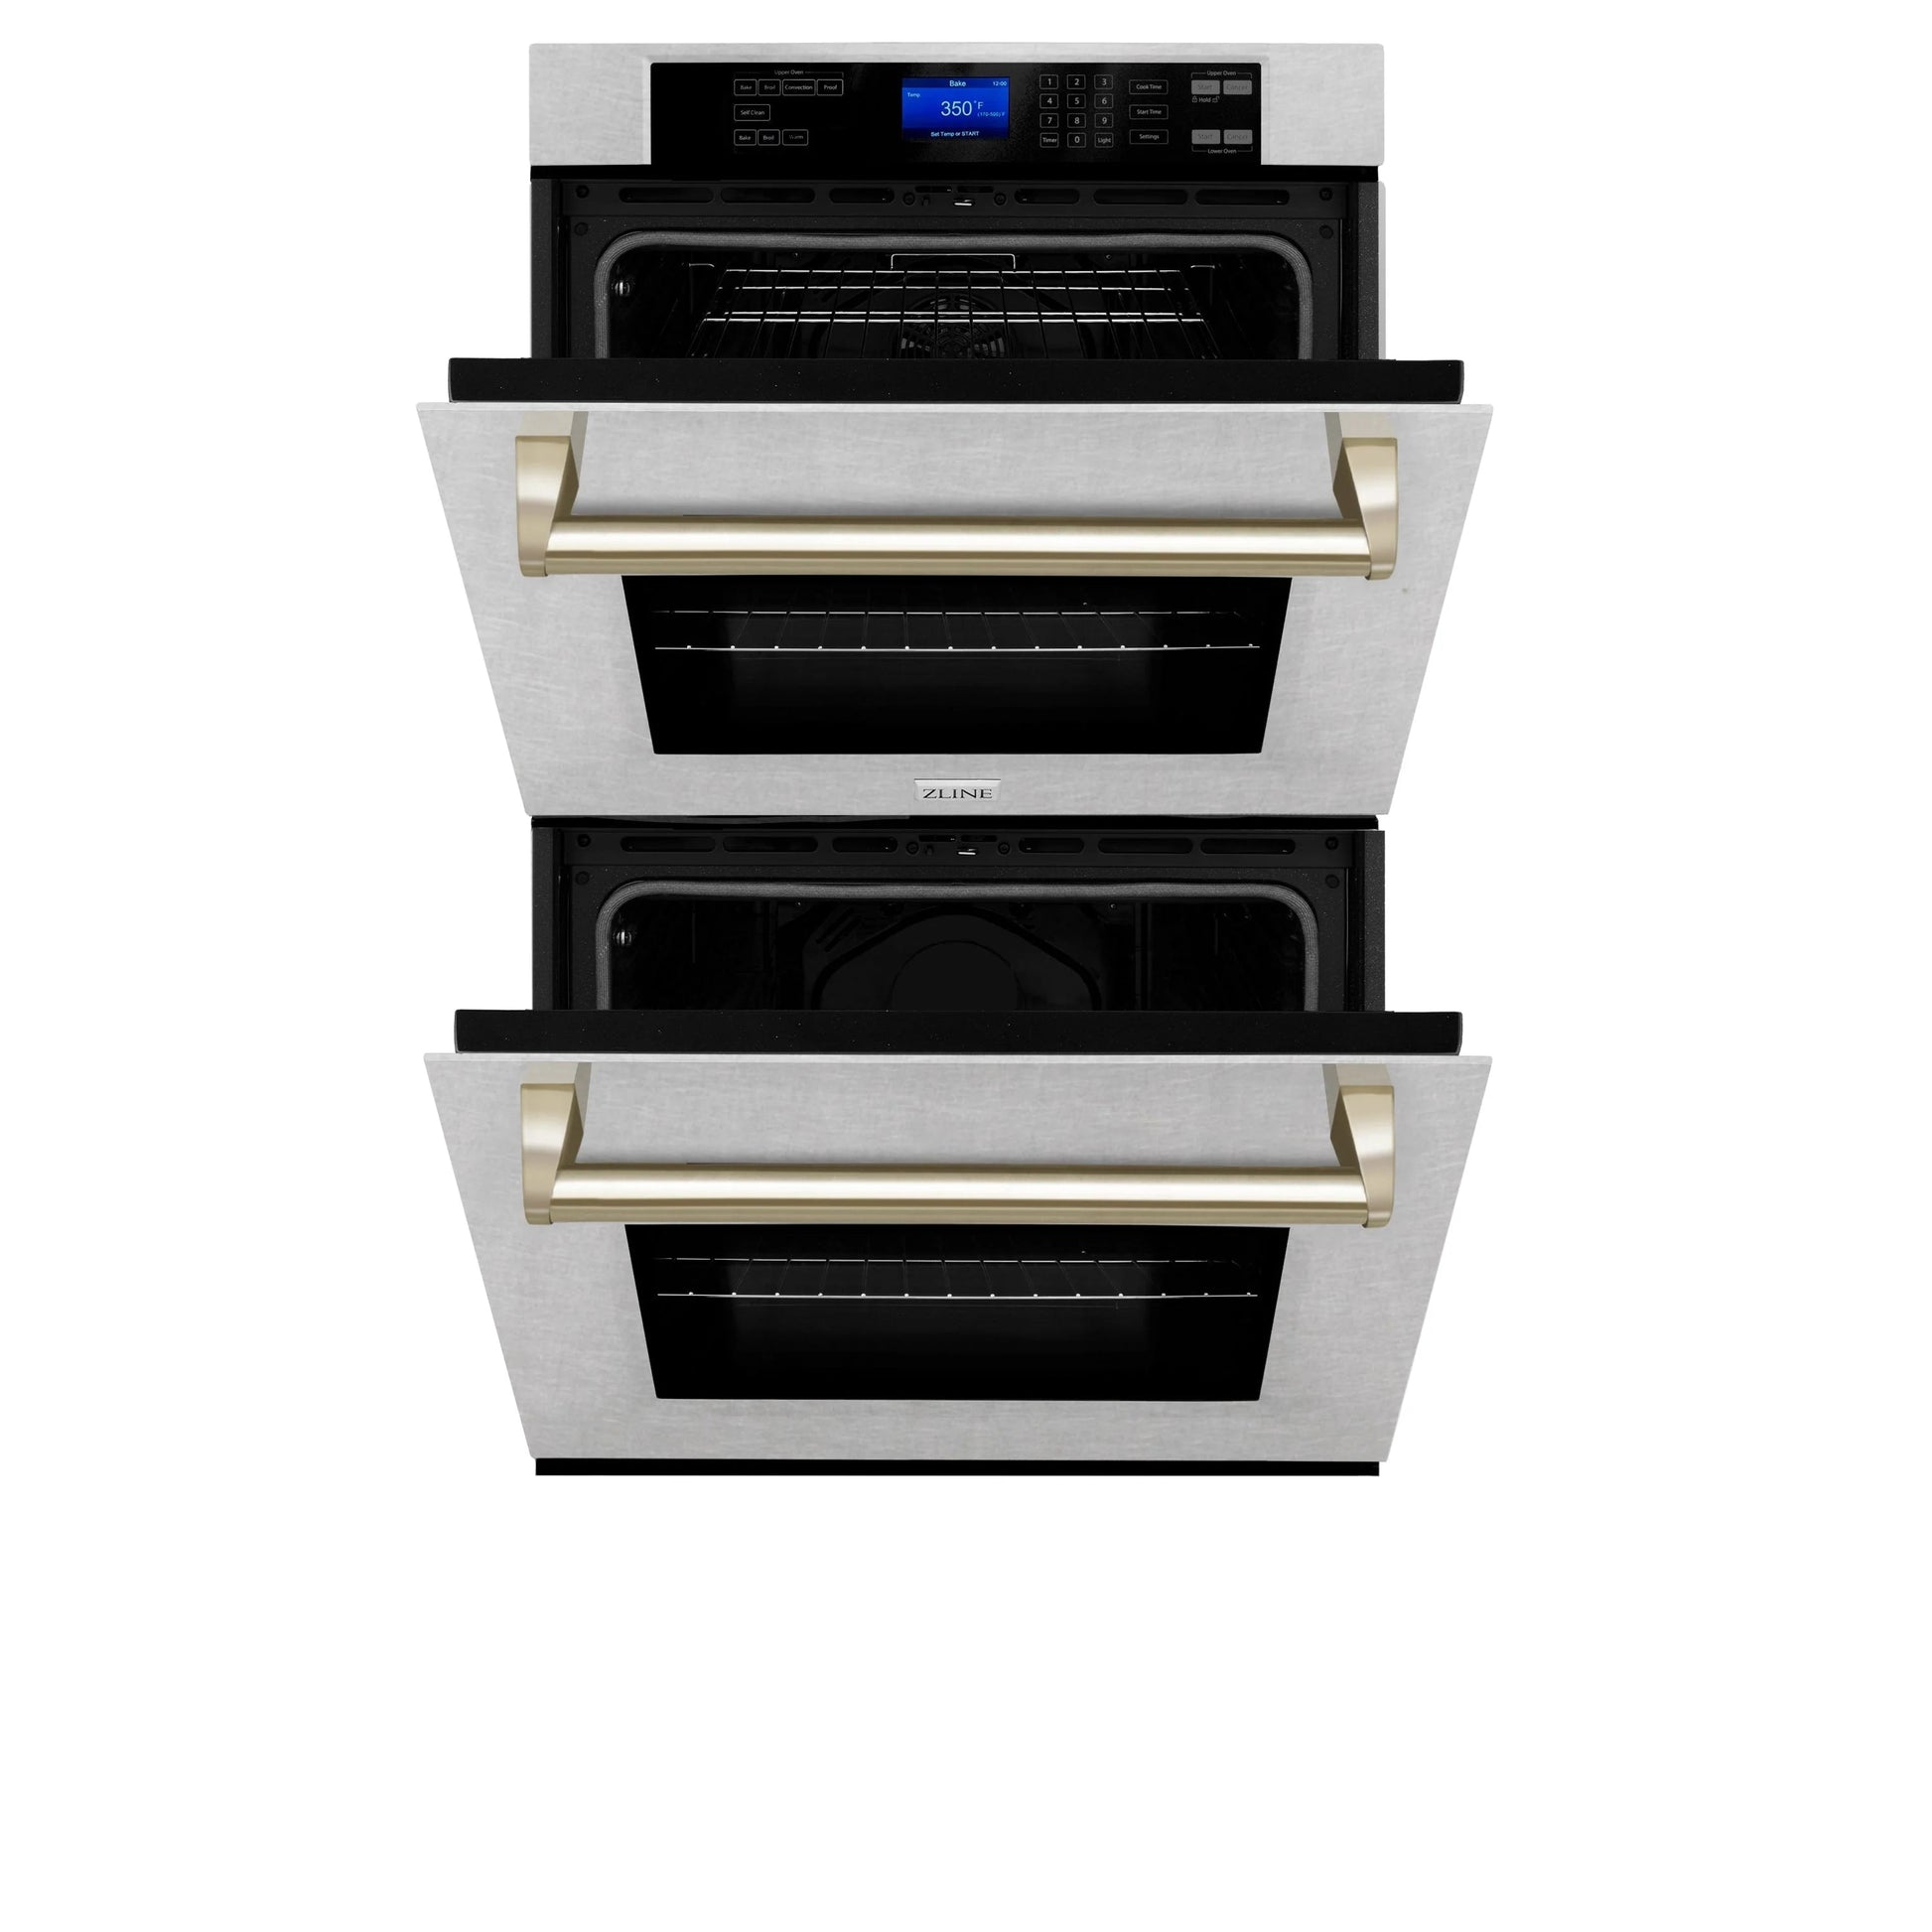 ZLINE Autograph Edition 30" Electric Oven - DuraSnow with Polished Gold Accents